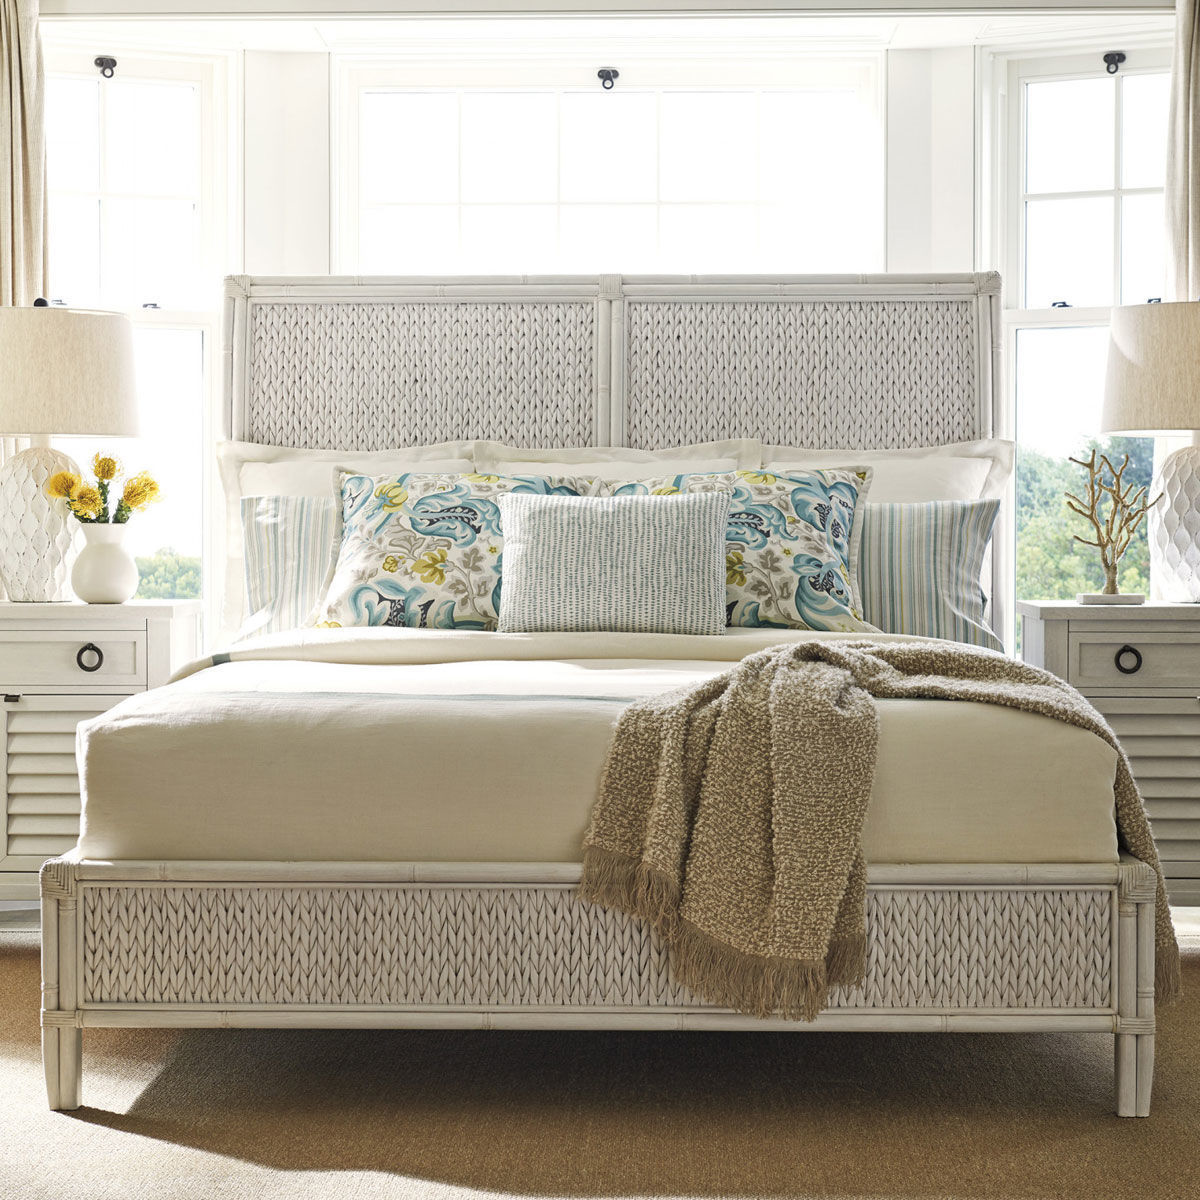 Picture of Siesta Key Woven Bed